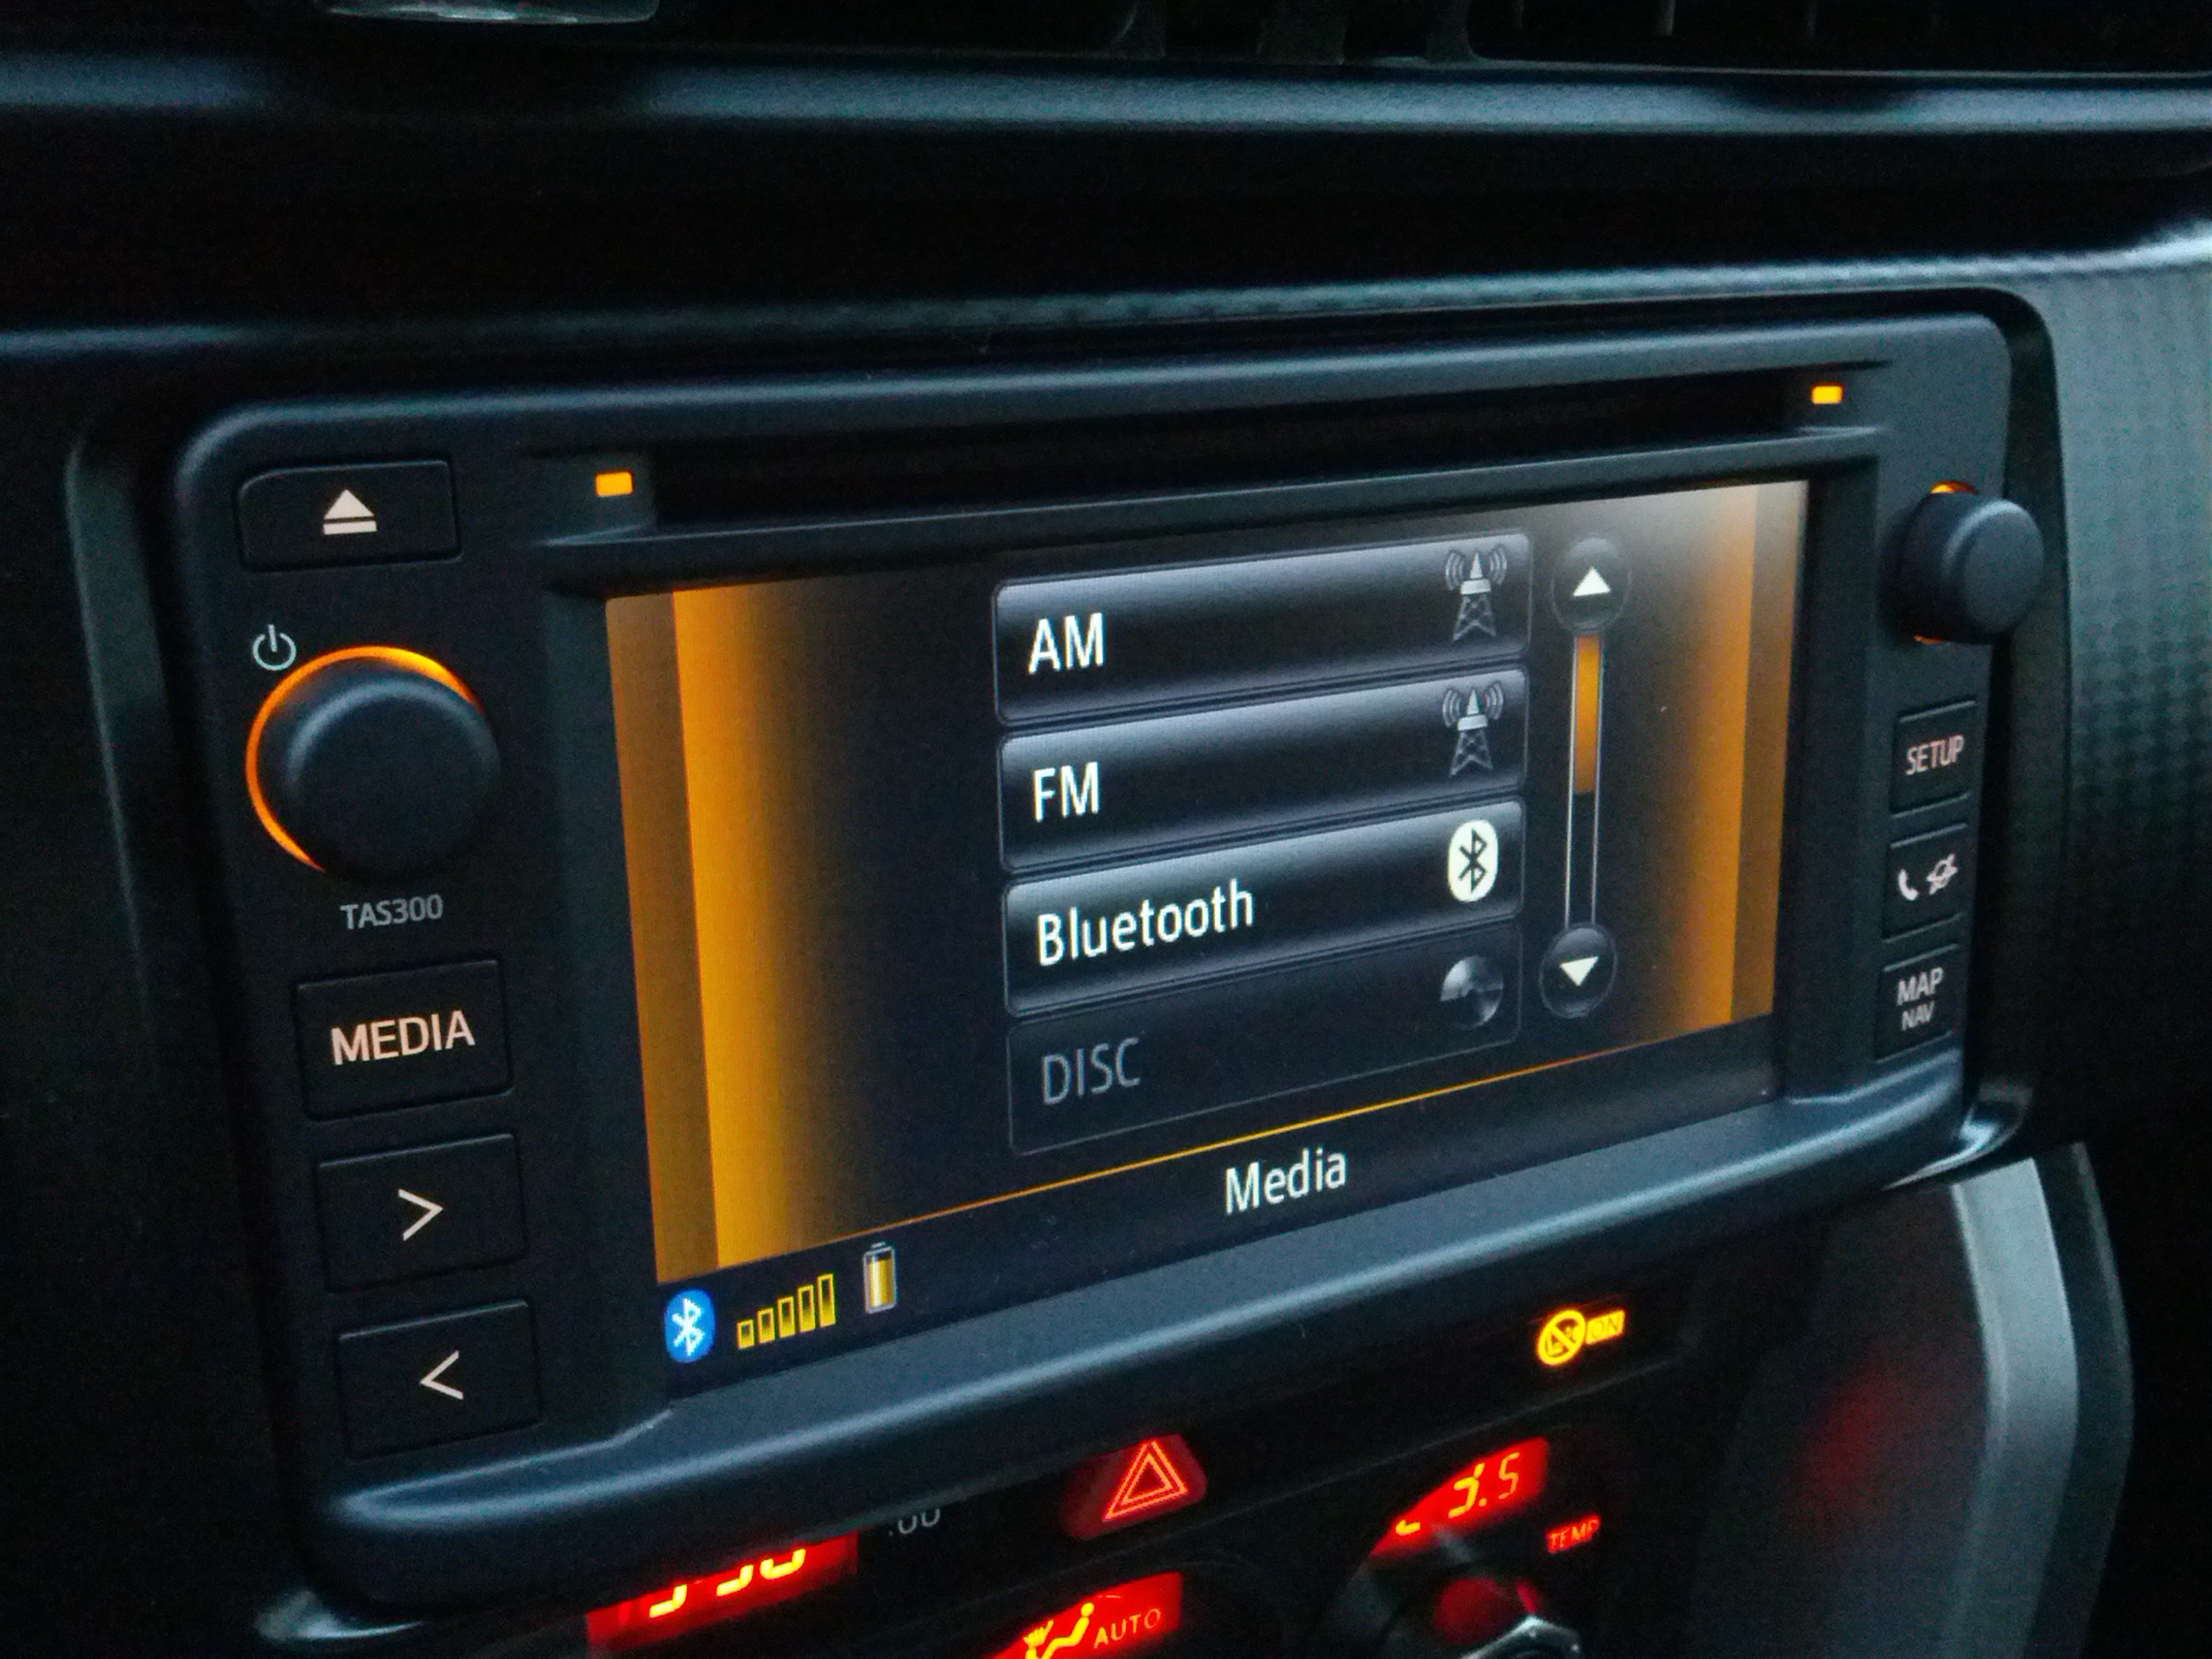 How the firmware updates work on Toyota Touch & Go